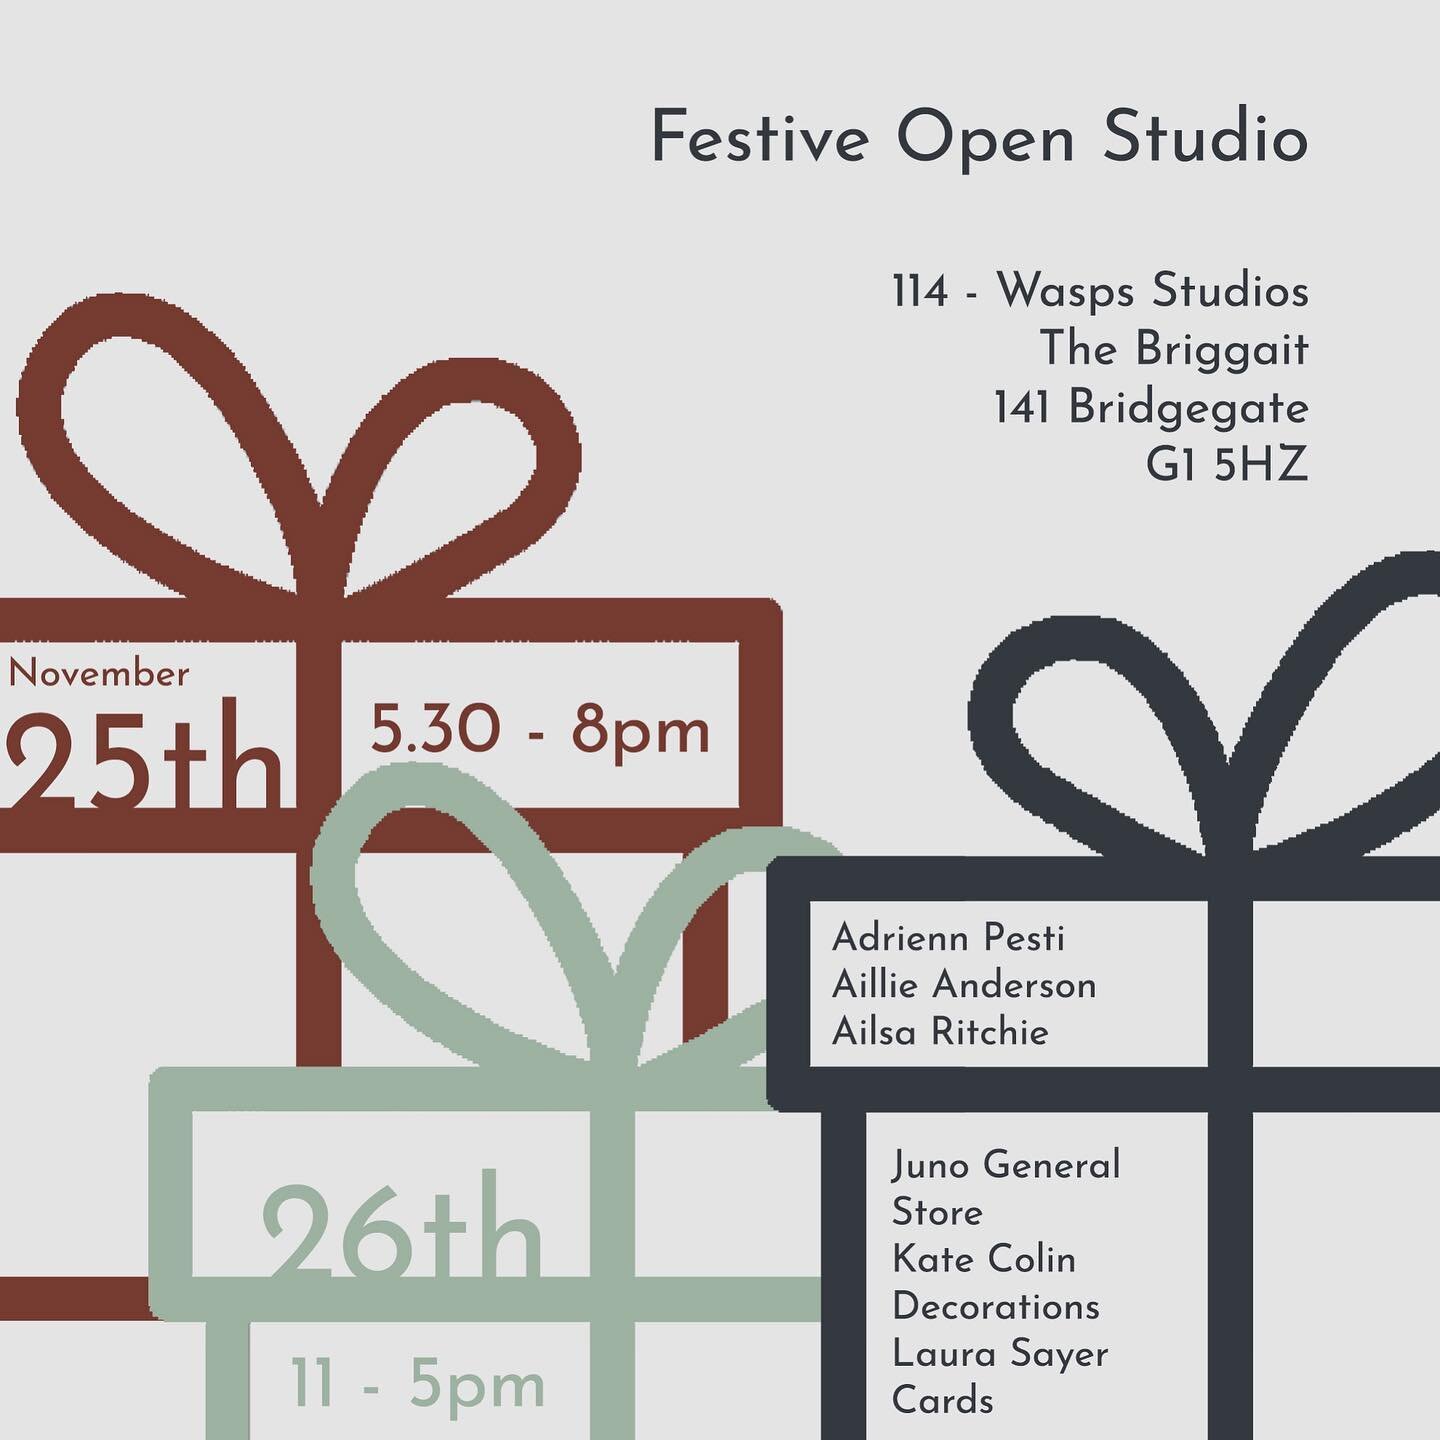 Event news ~ We are so happy to be bringing back our Festive Open Studio for 2022!

Come along and join us for a festive weekend of shopping lovely jewellery gifts by @aillieanderson.silver @adriennpesti_design &amp; myself, straight from our studio!